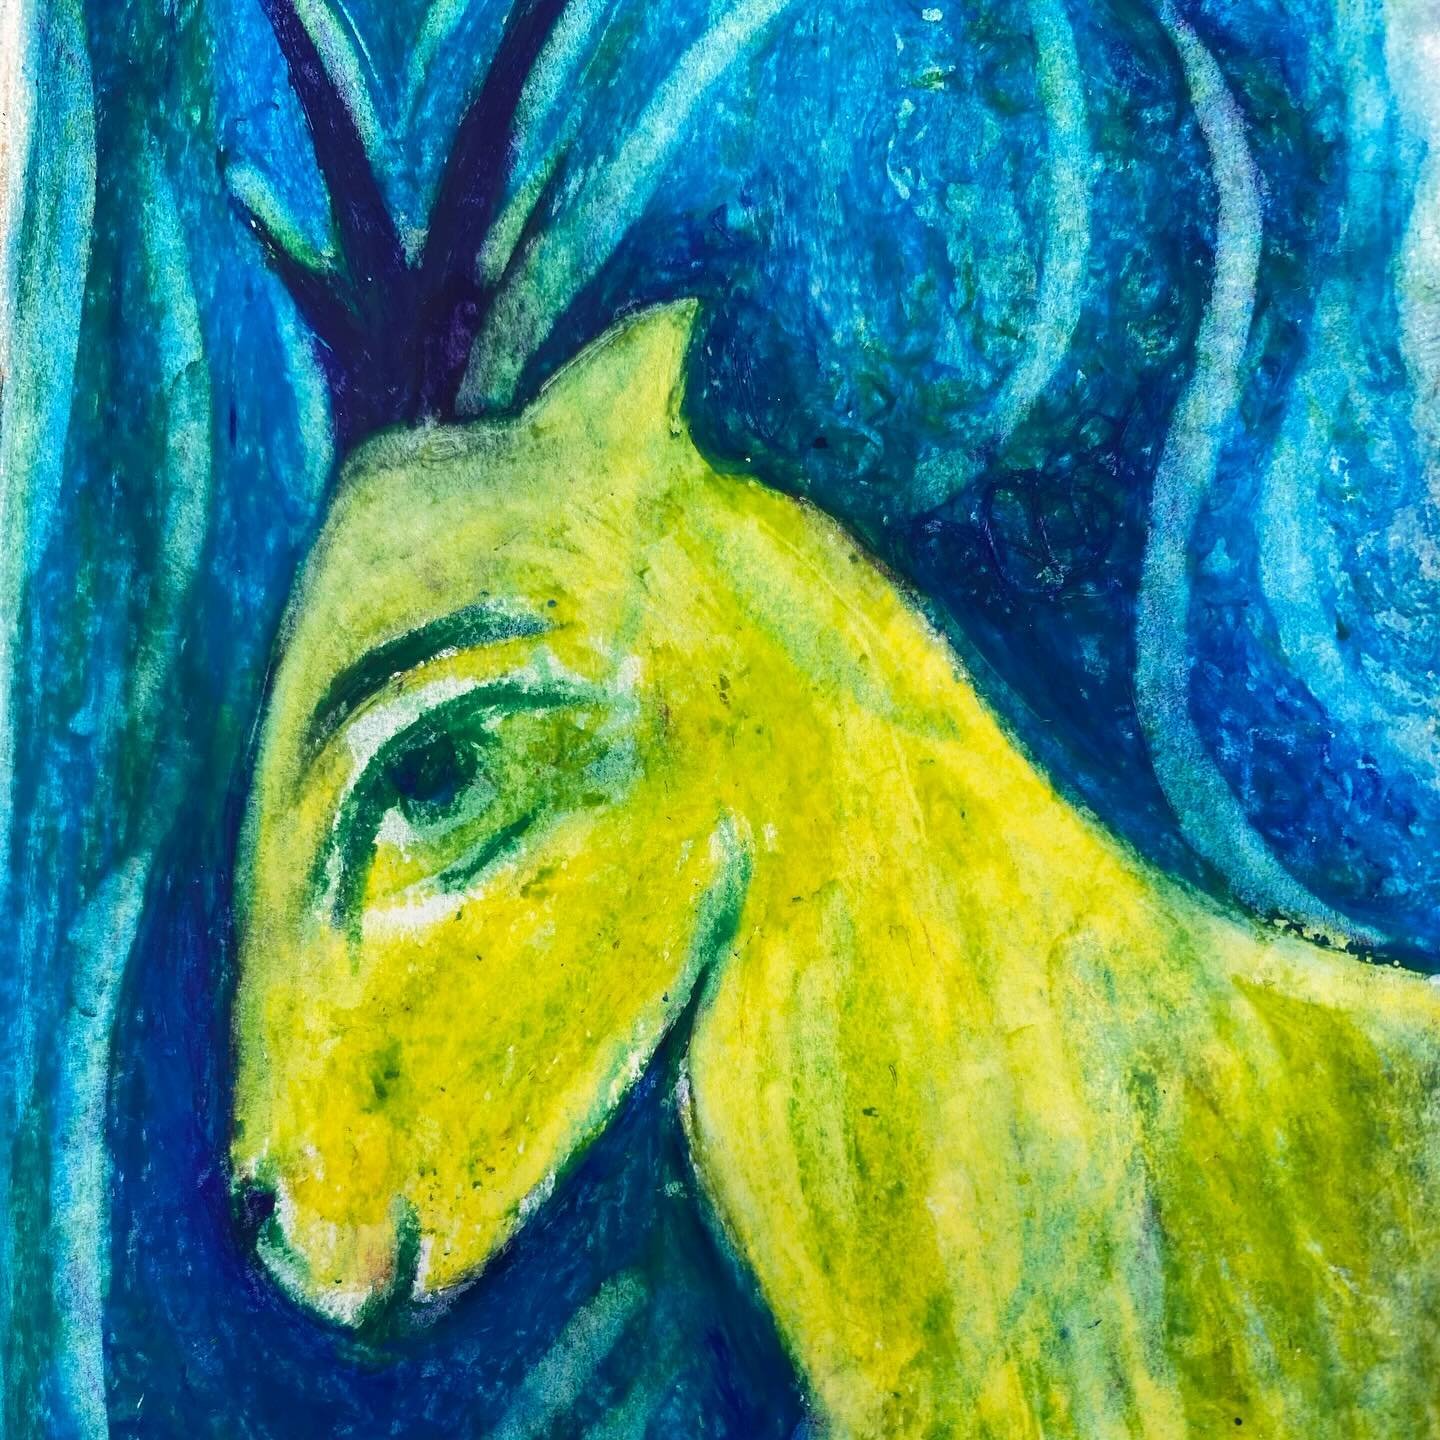 I had the most inspiring, magical day the Marc Chagall museum in Nice. Had to draw one of his cheeky little goats to remember the experience 💚💙